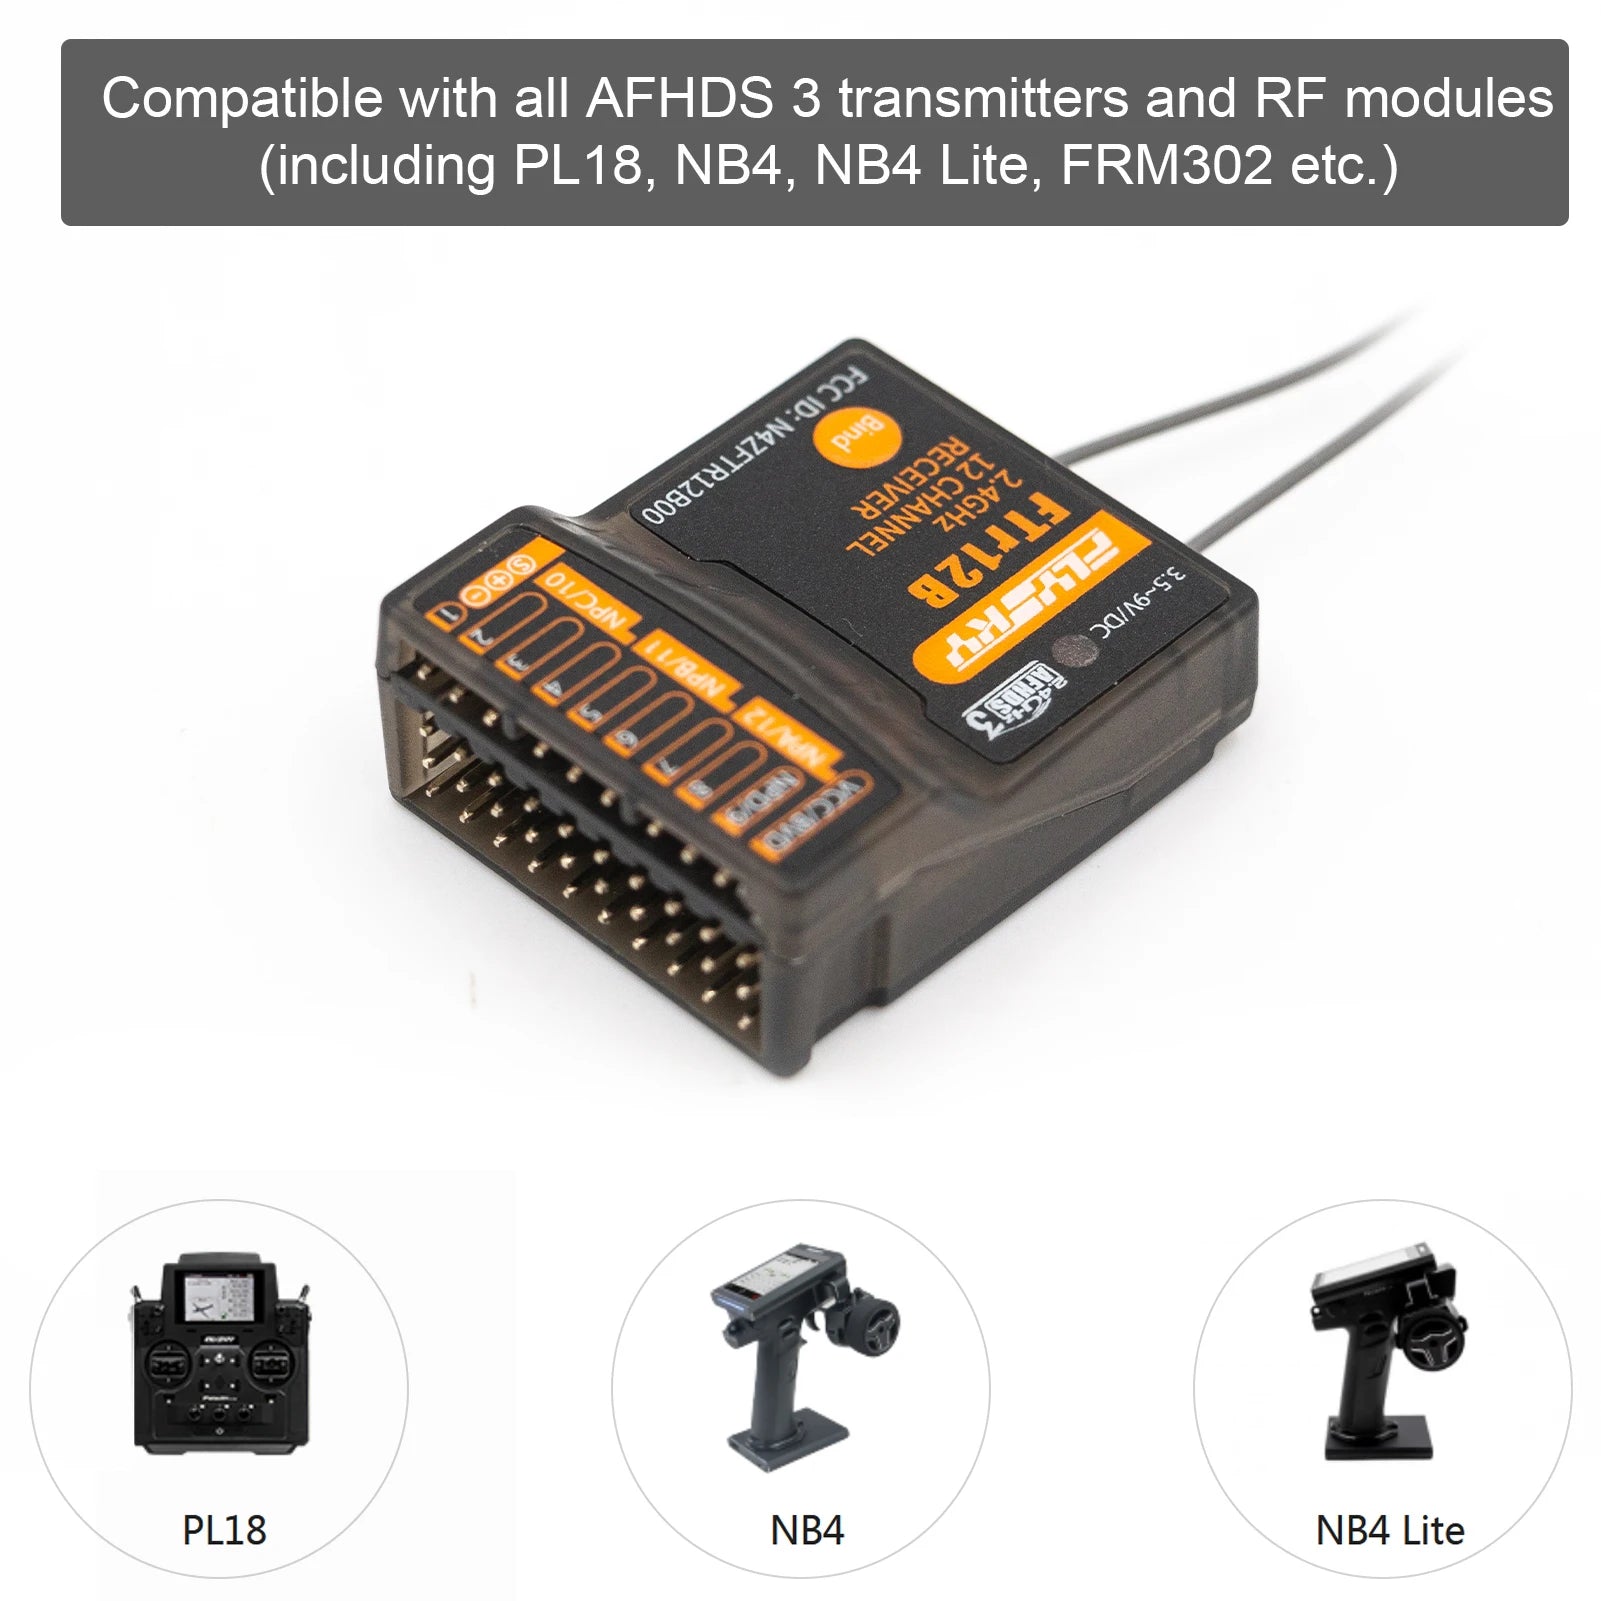 Compatible with all AFHDS 3 transmitters and RF modules (including PL18